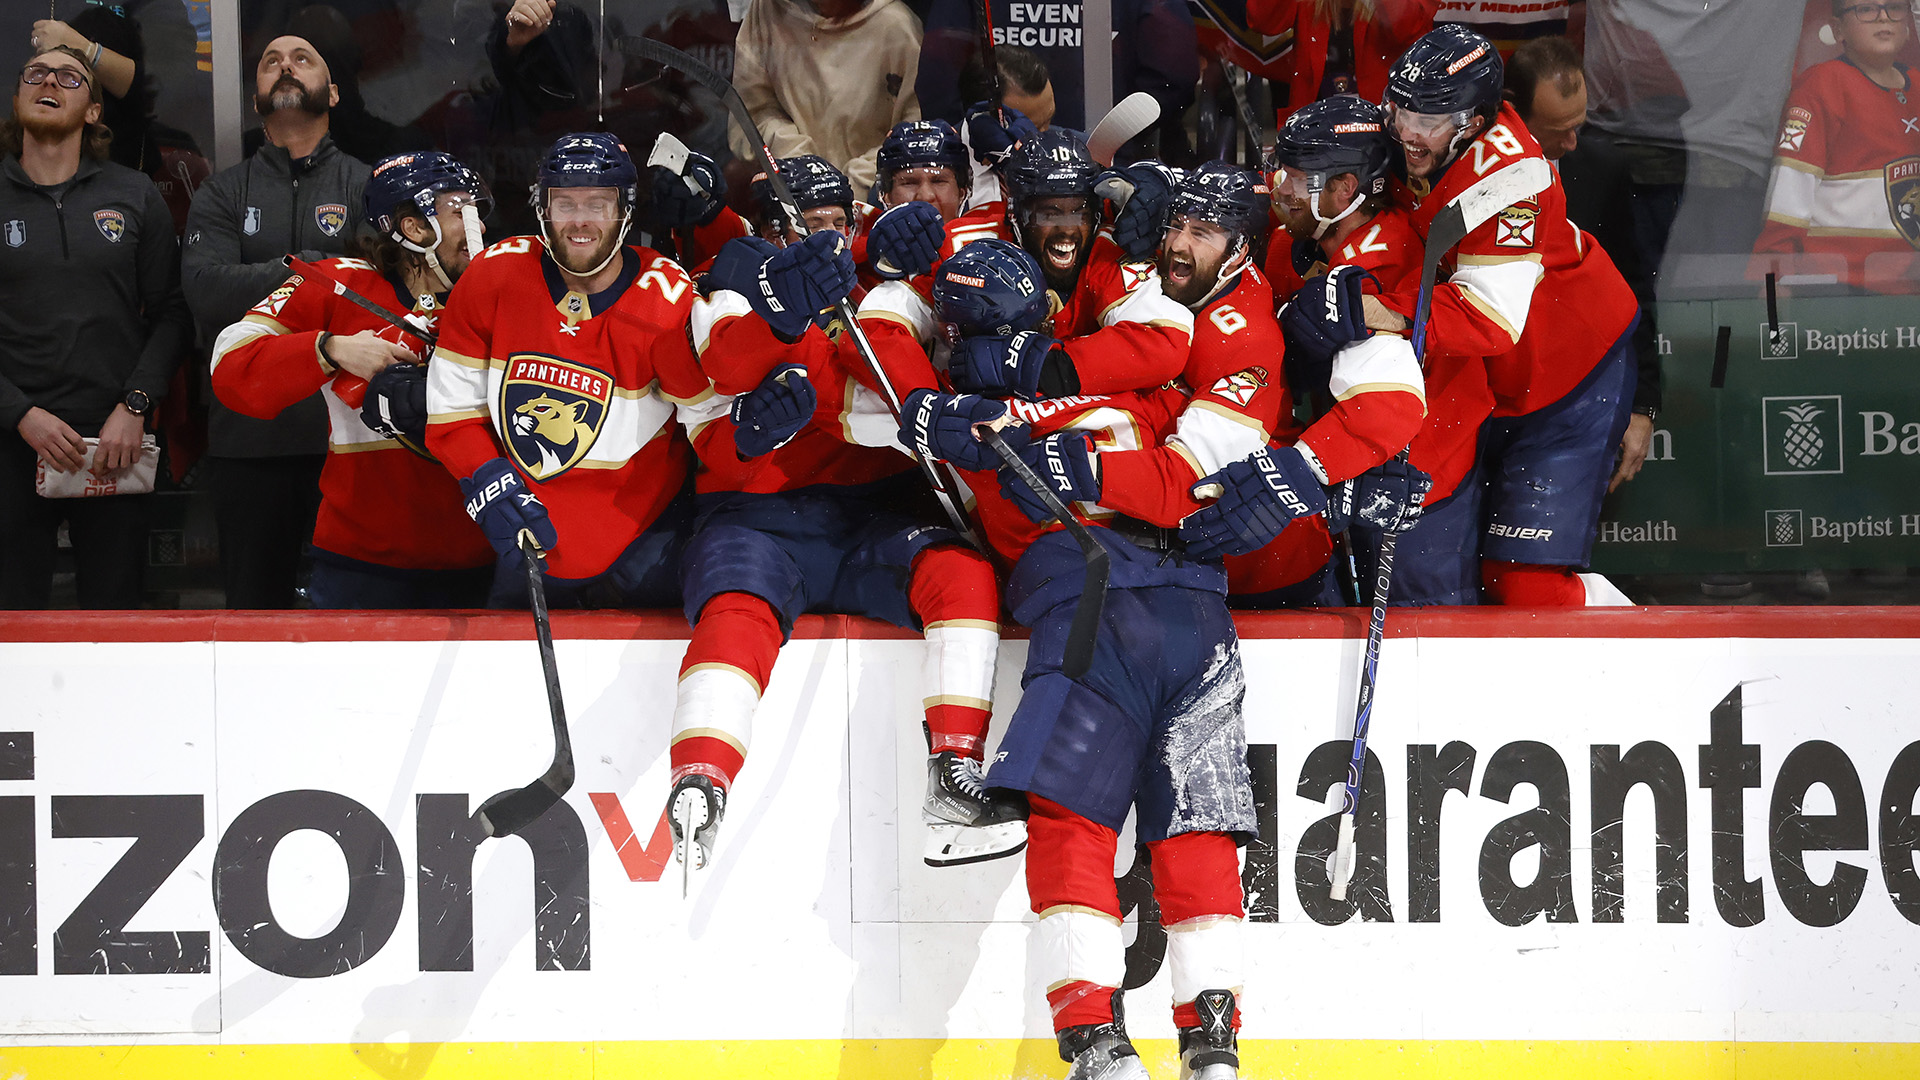 Matthew Tkachuk #19 of the Florida Panthers celebrates with his teammates after scoring the game winning goal on Frederik Andersen #31 of the Carolina Hurricanes during the third period in Game Four of the Eastern Conference Final of the 2023 Stanley Cup Playoffs at FLA Live Arena on May 24, 2023 in Sunrise, Florida.